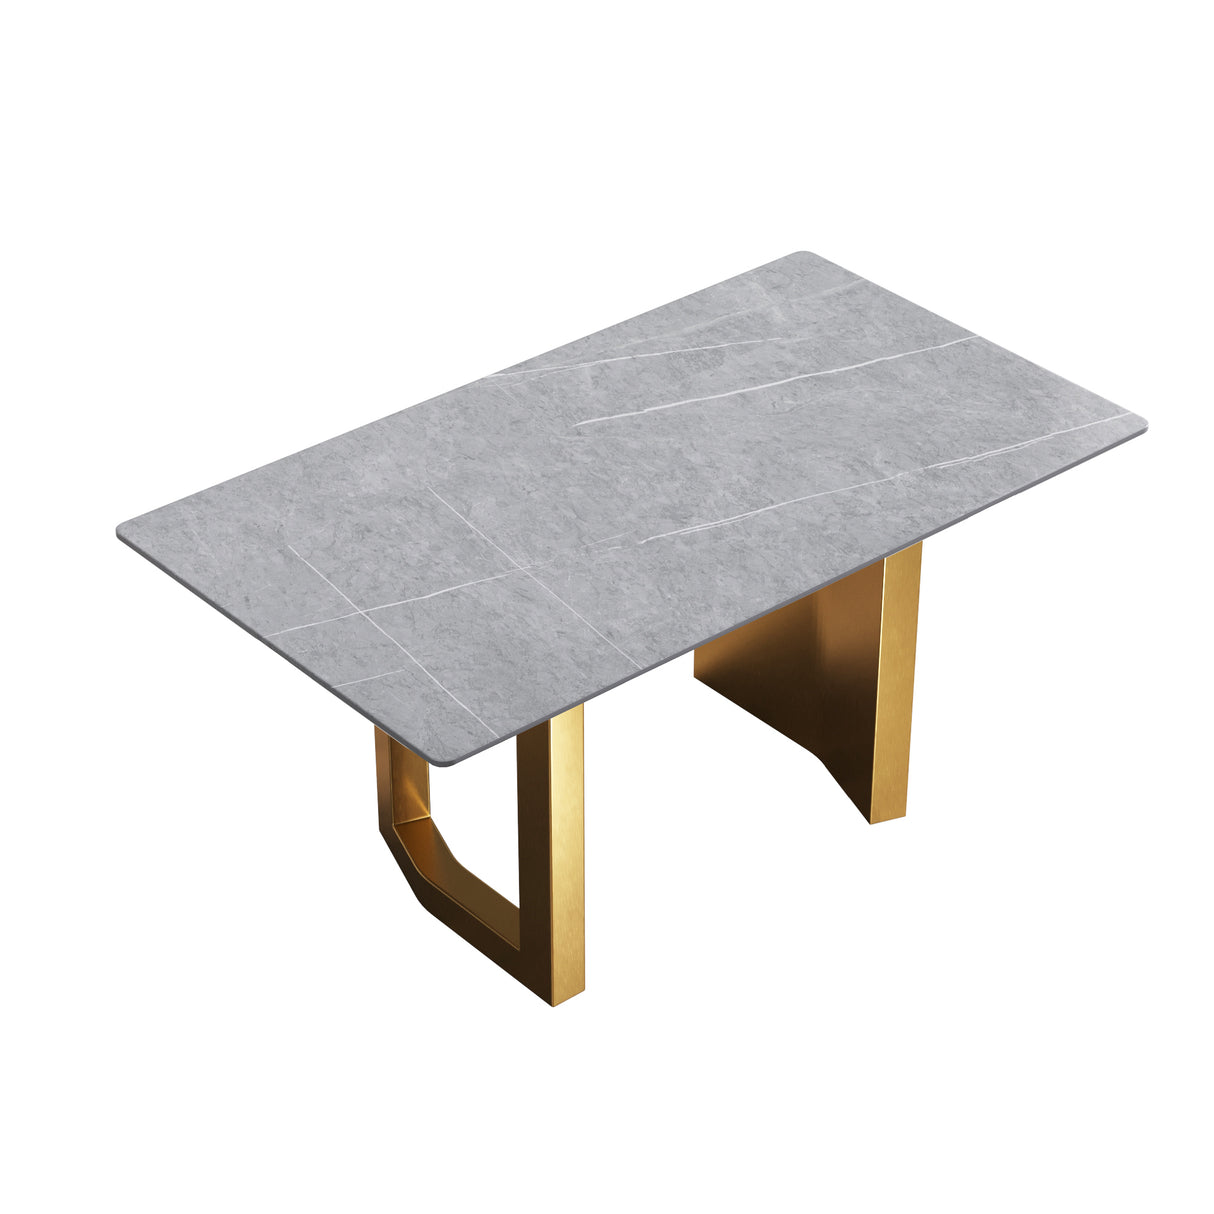 63"Modern artificial stone gray straight edge golden metal leg dining table -6 people - Home Elegance USA